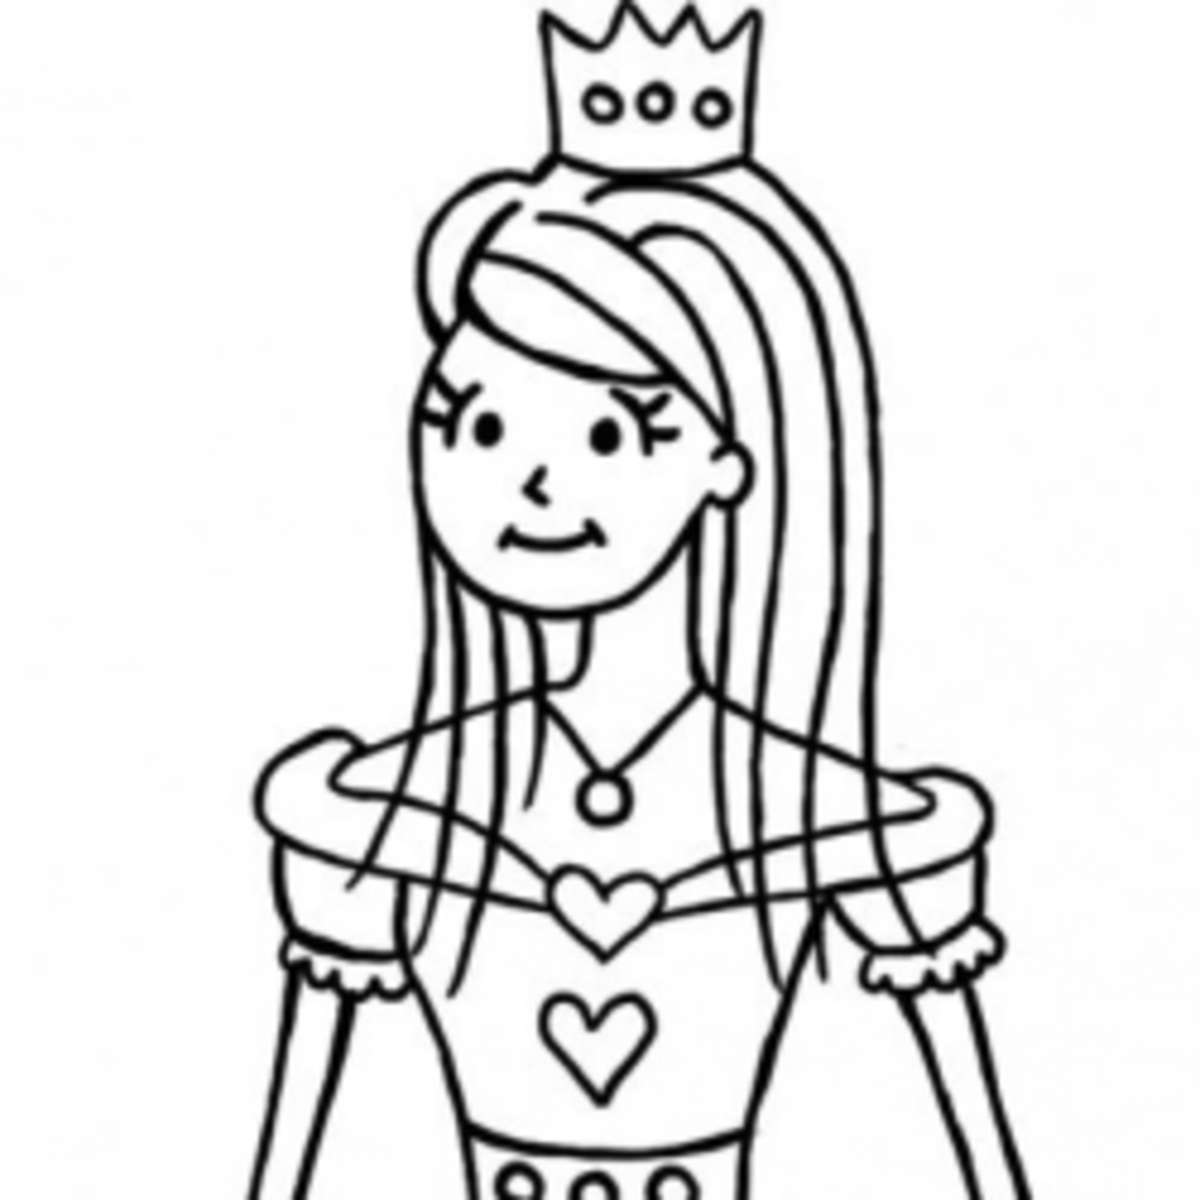 How to Draw a Princess: Step-by-Step for Kids